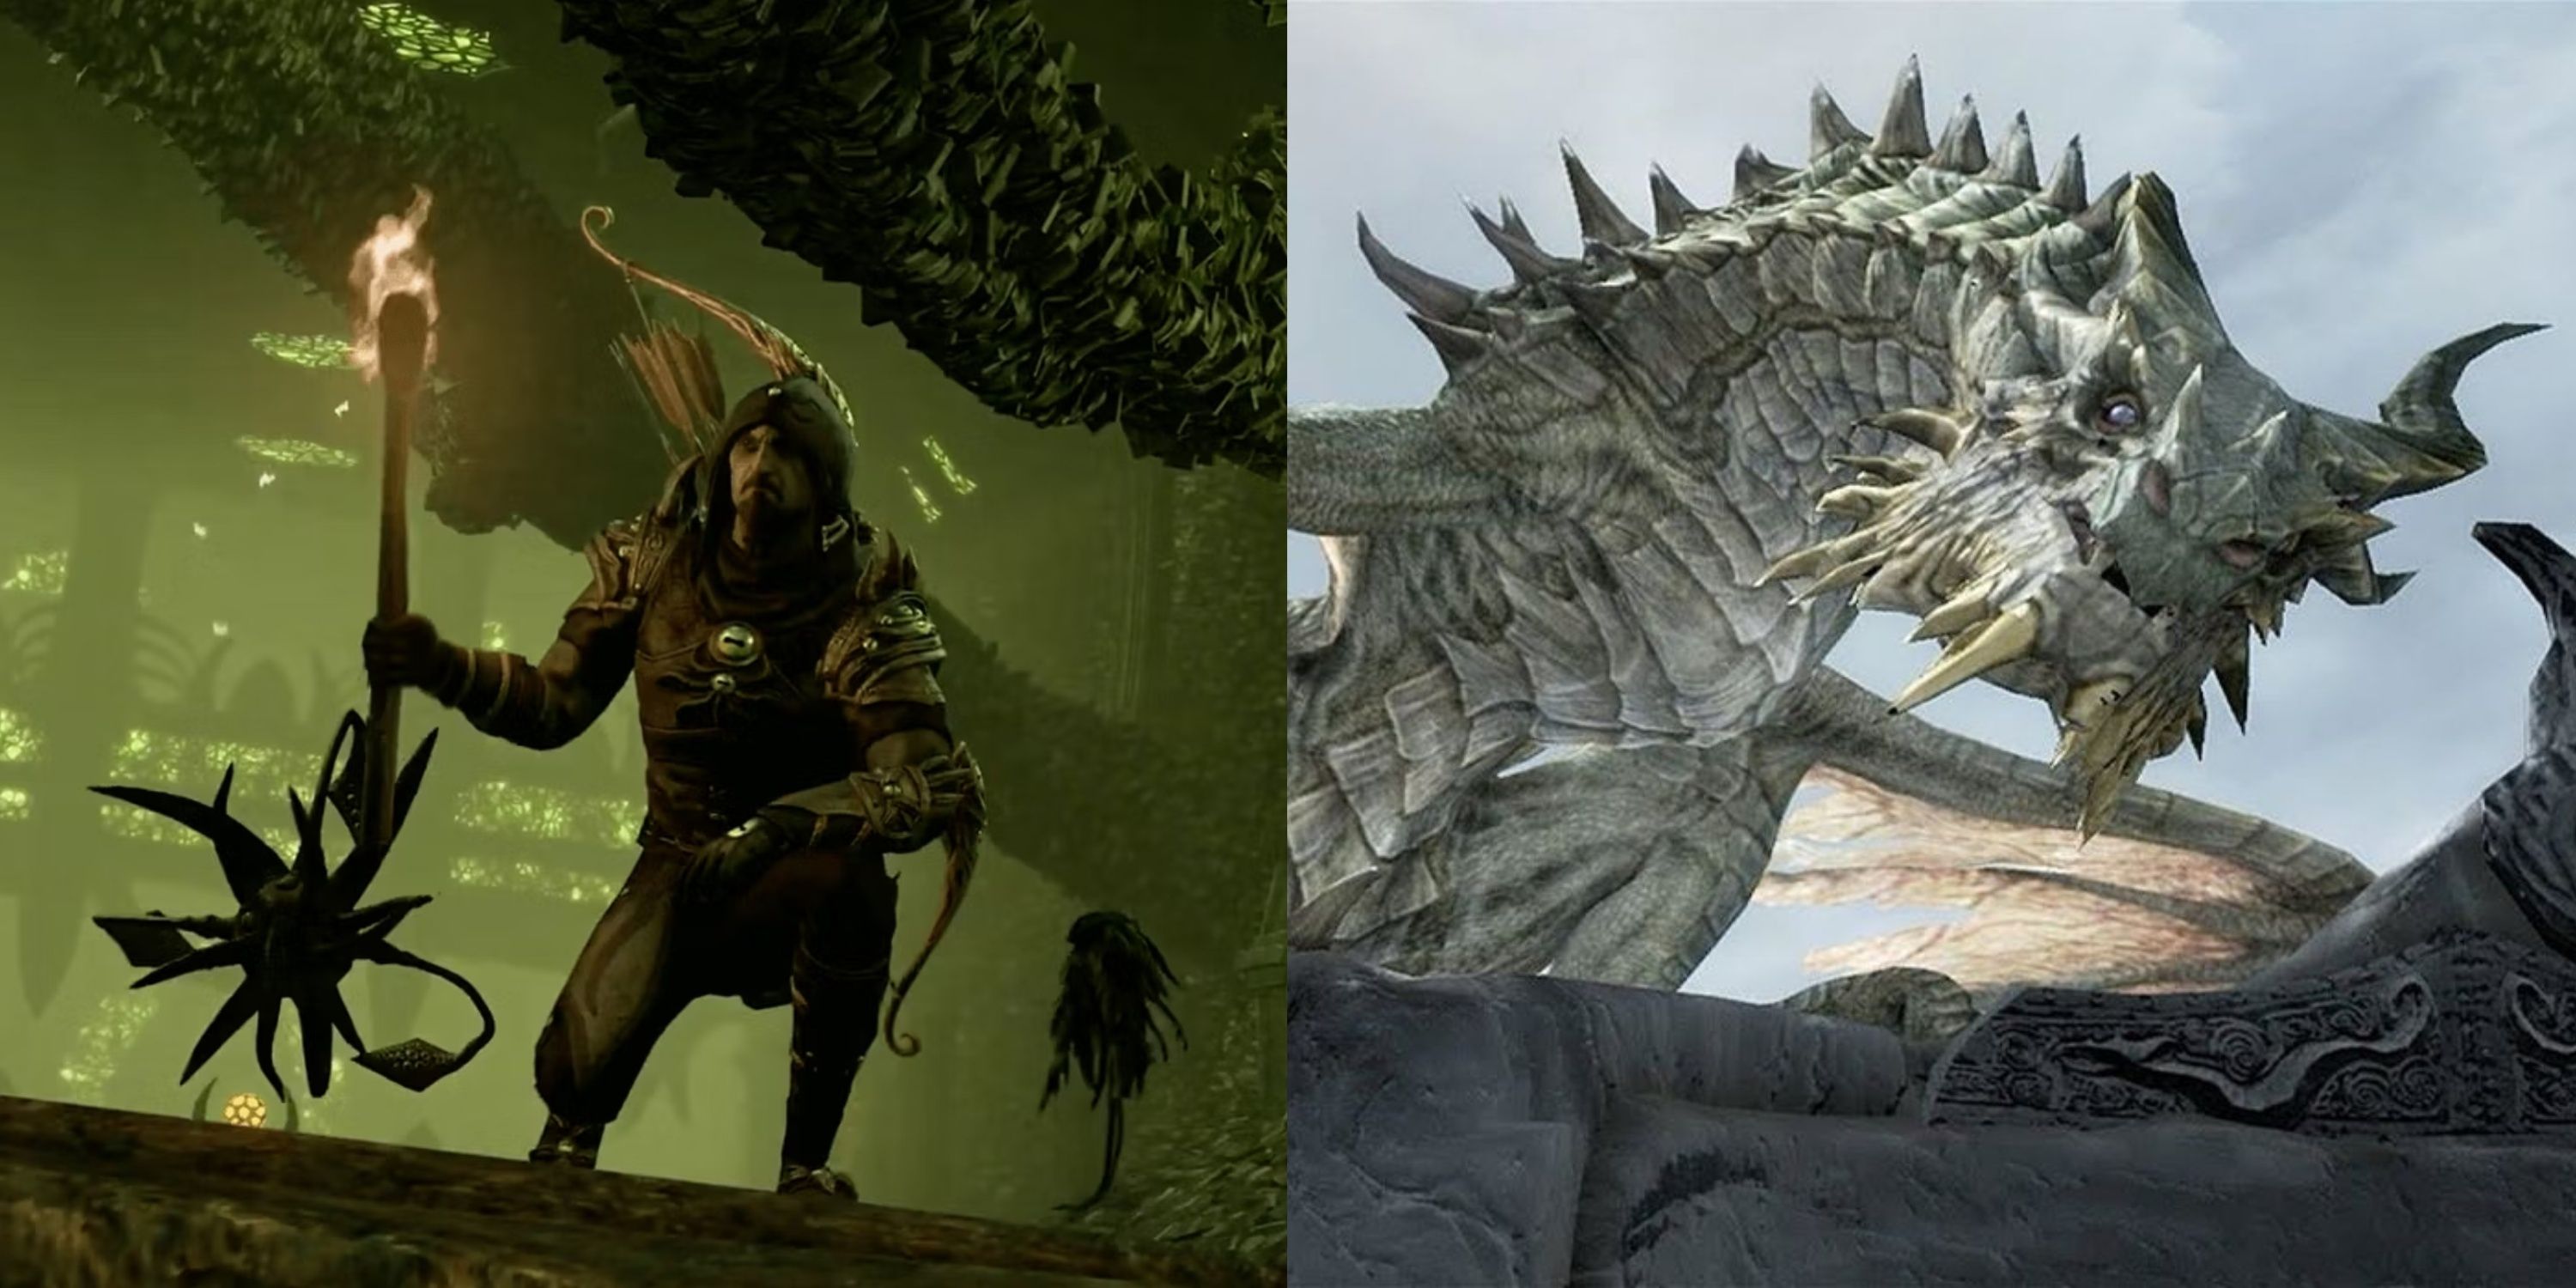 Apocrypha and Parthanax as they appear in The Elder Scrolls - Skyrim